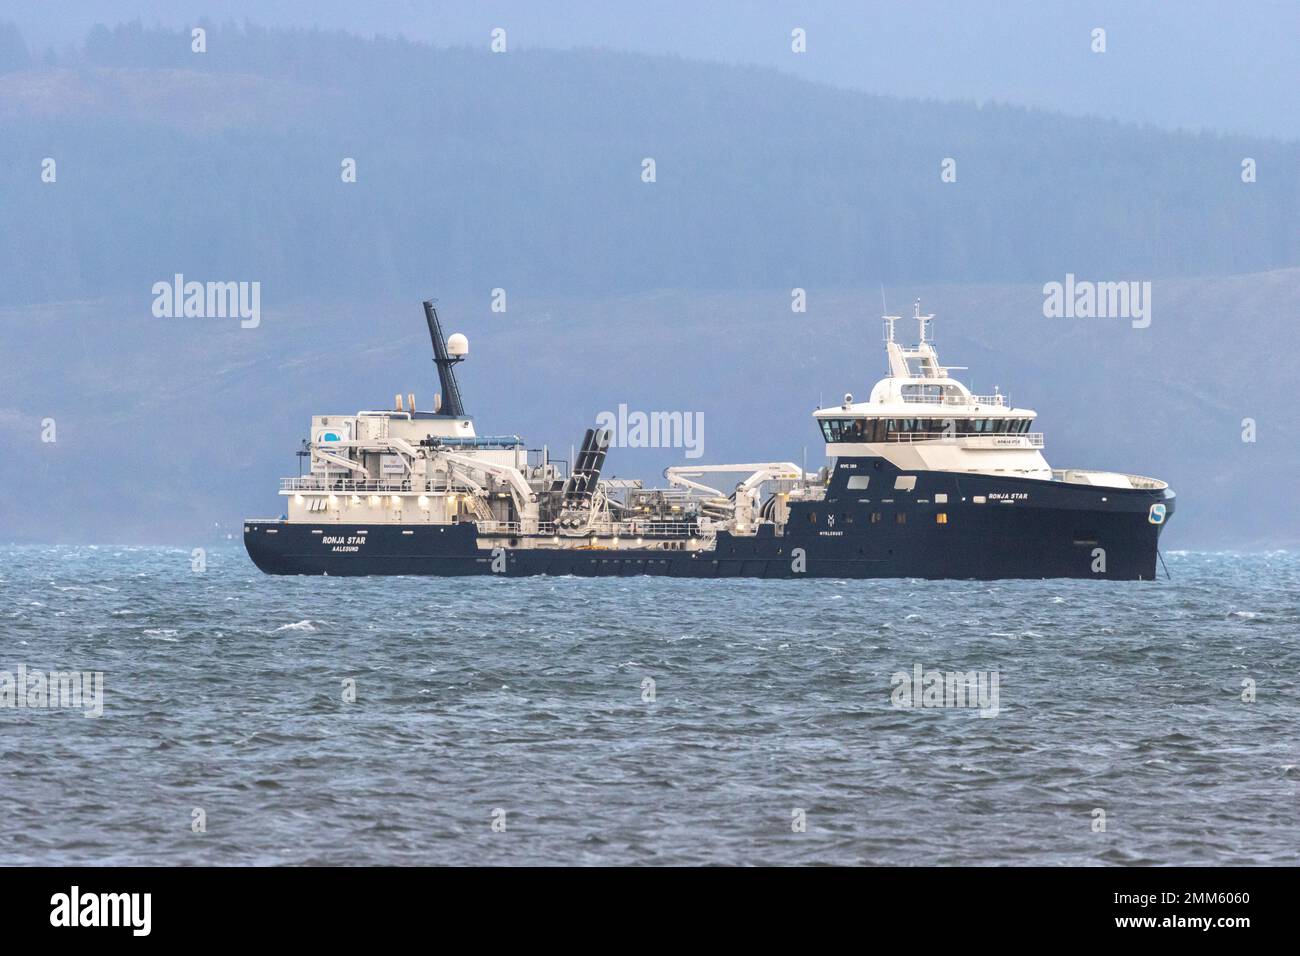 State-of-the-art Ronja Star ship is a live fish transport vessel anchored here at sea in the evening on Loch Fyne, Scotland, UK waters Stock Photo